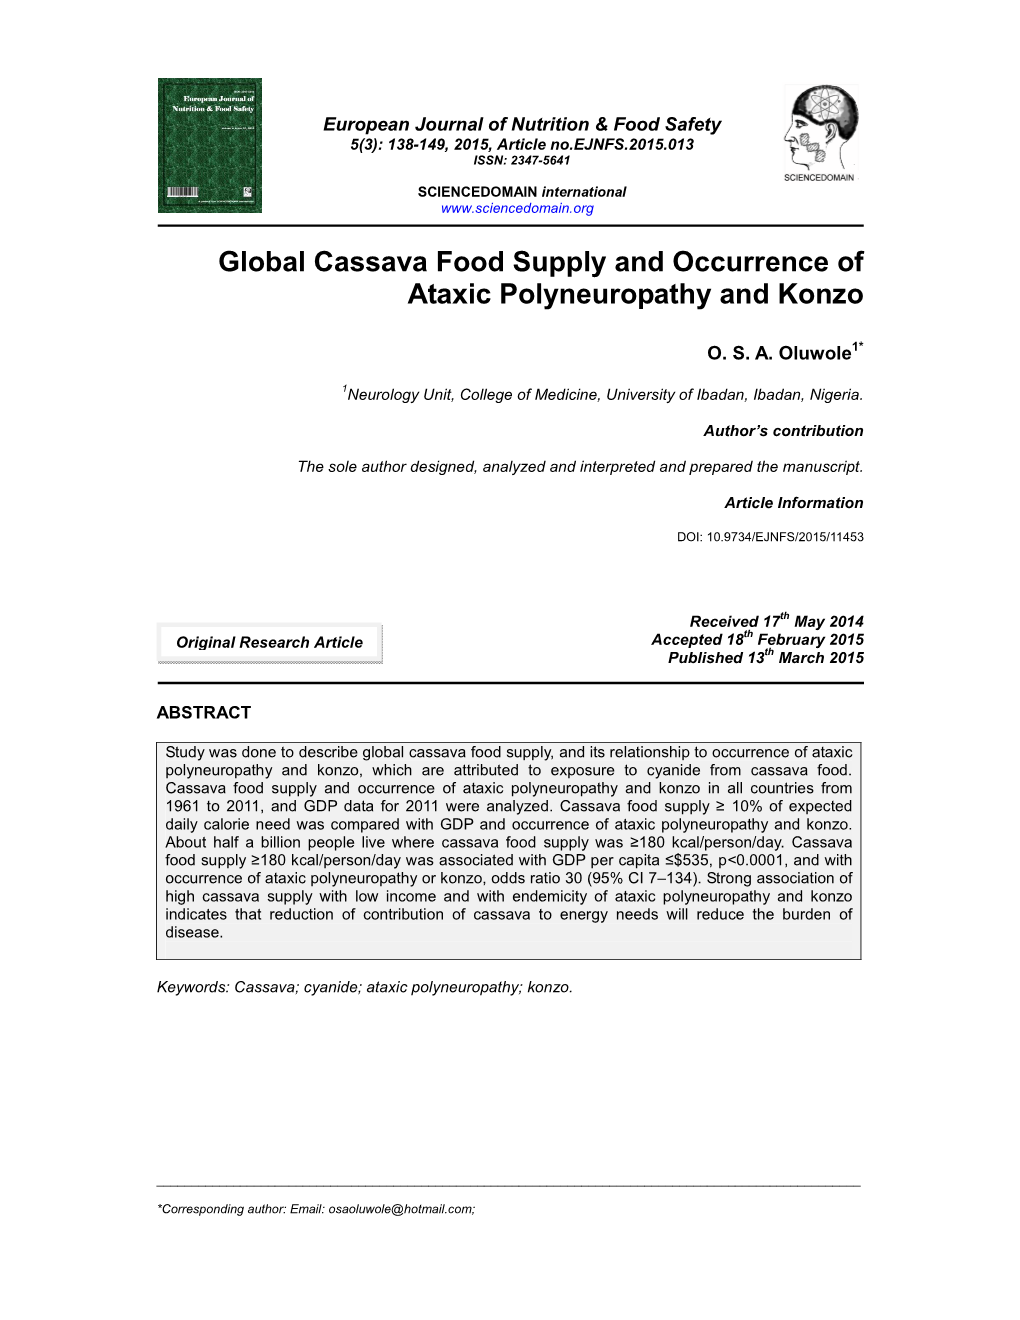 Global Cassava Food Supply and Occurrence of Ataxic Polyneuropathy and Konzo